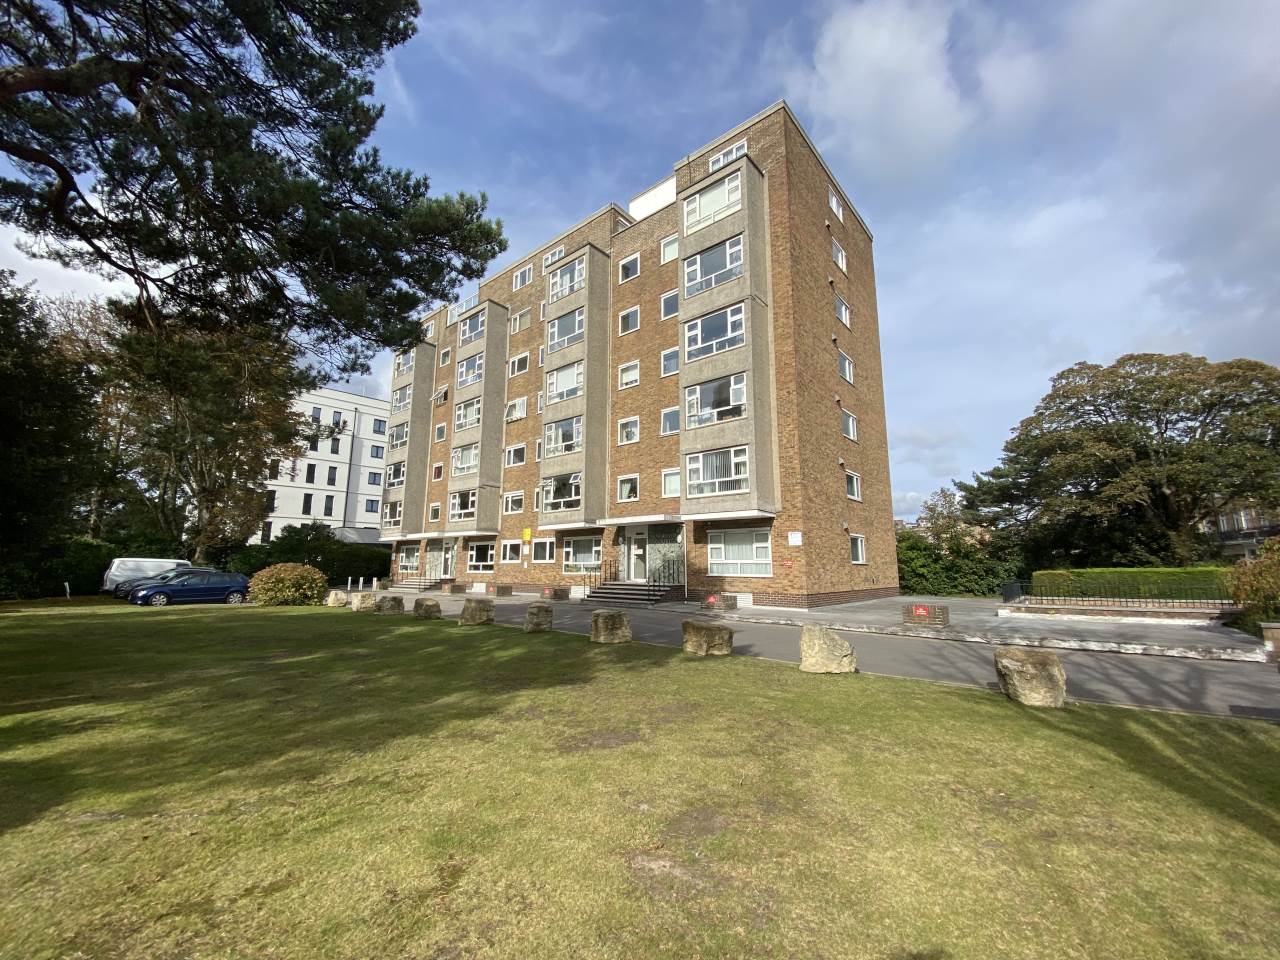 NO CHAIN!!  2 BEDROOM FIRST FLOOR APARTMENT* SHARE OF FREEHOLD* REQUIRES MODERNISATION* UNDERGROUND PARKING* IDEAL BUY TO LET* 200 YARDS FROM BEACHES.